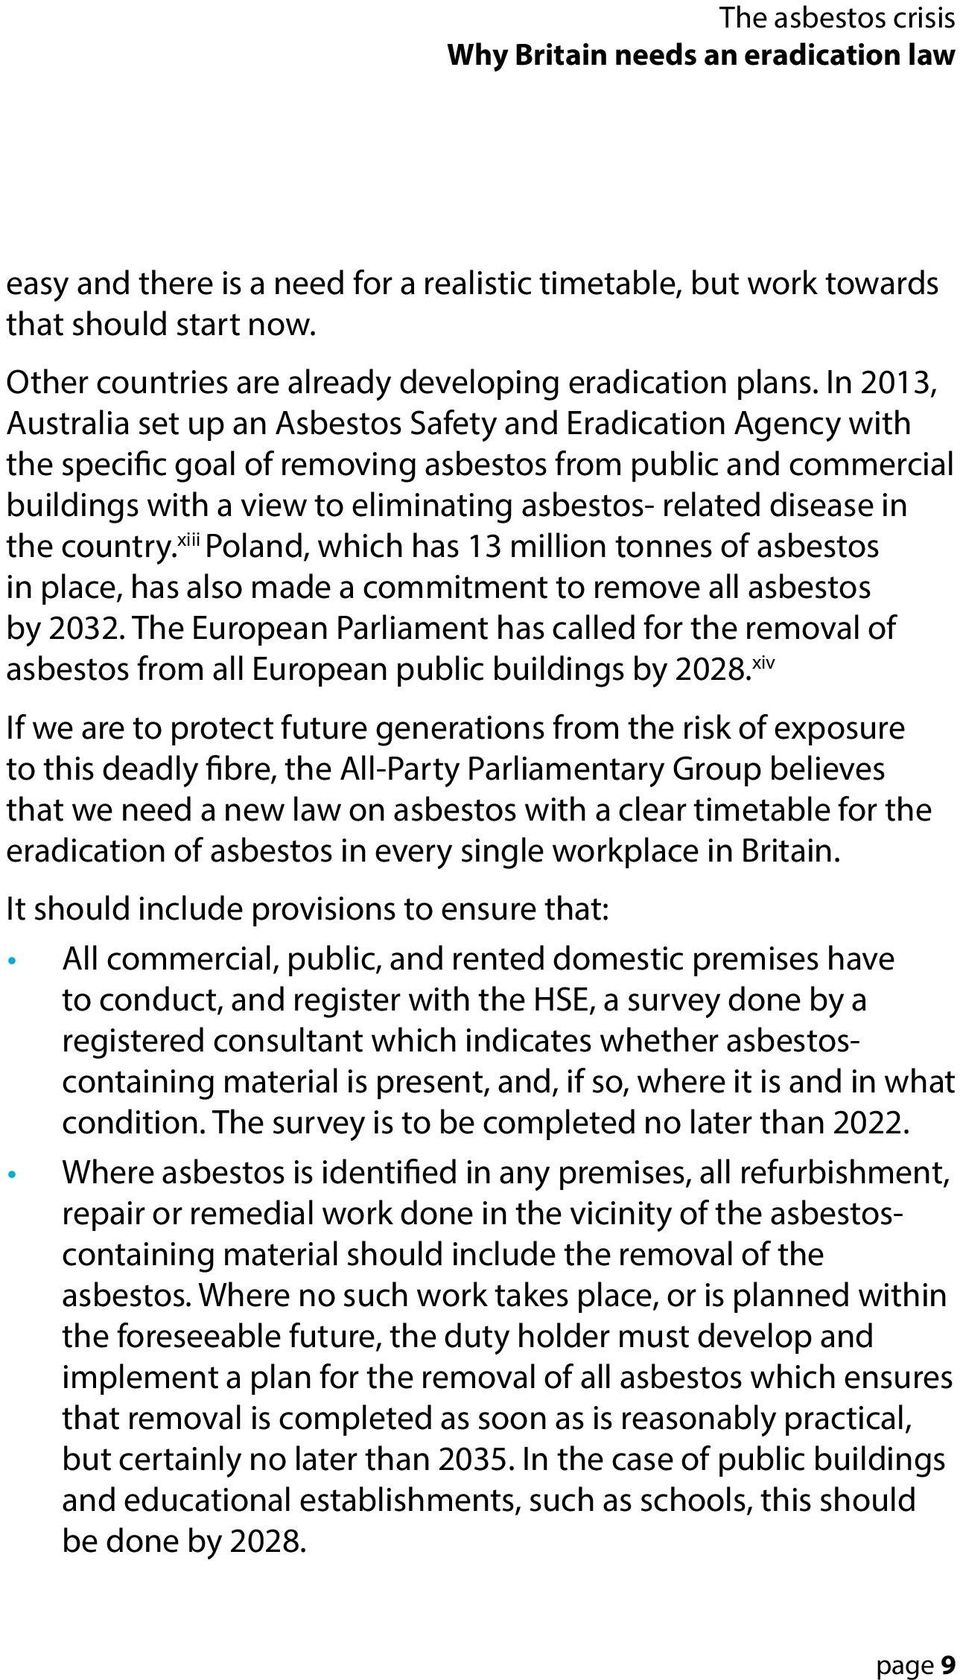 disease in the country. xiii Poland, which has 13 million tonnes of asbestos in place, has also made a commitment to remove all asbestos by 2032.